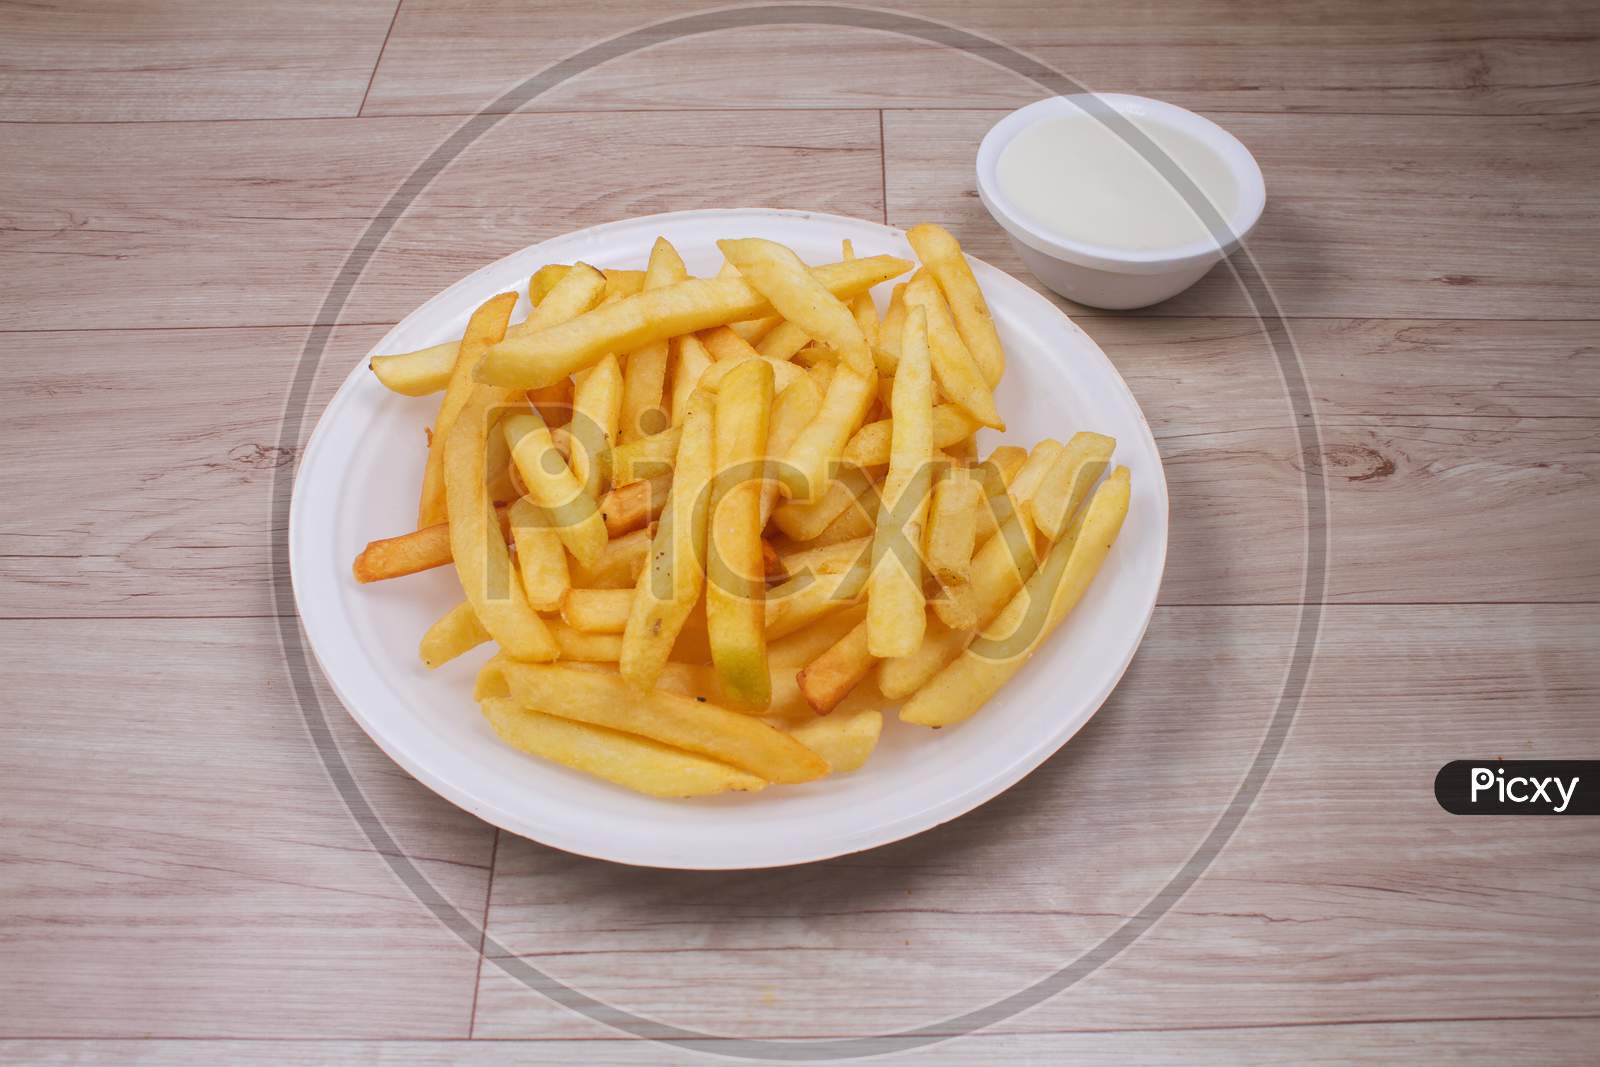 Portion Of French Fries With Sauce And Mayonnaise.Stock Photo